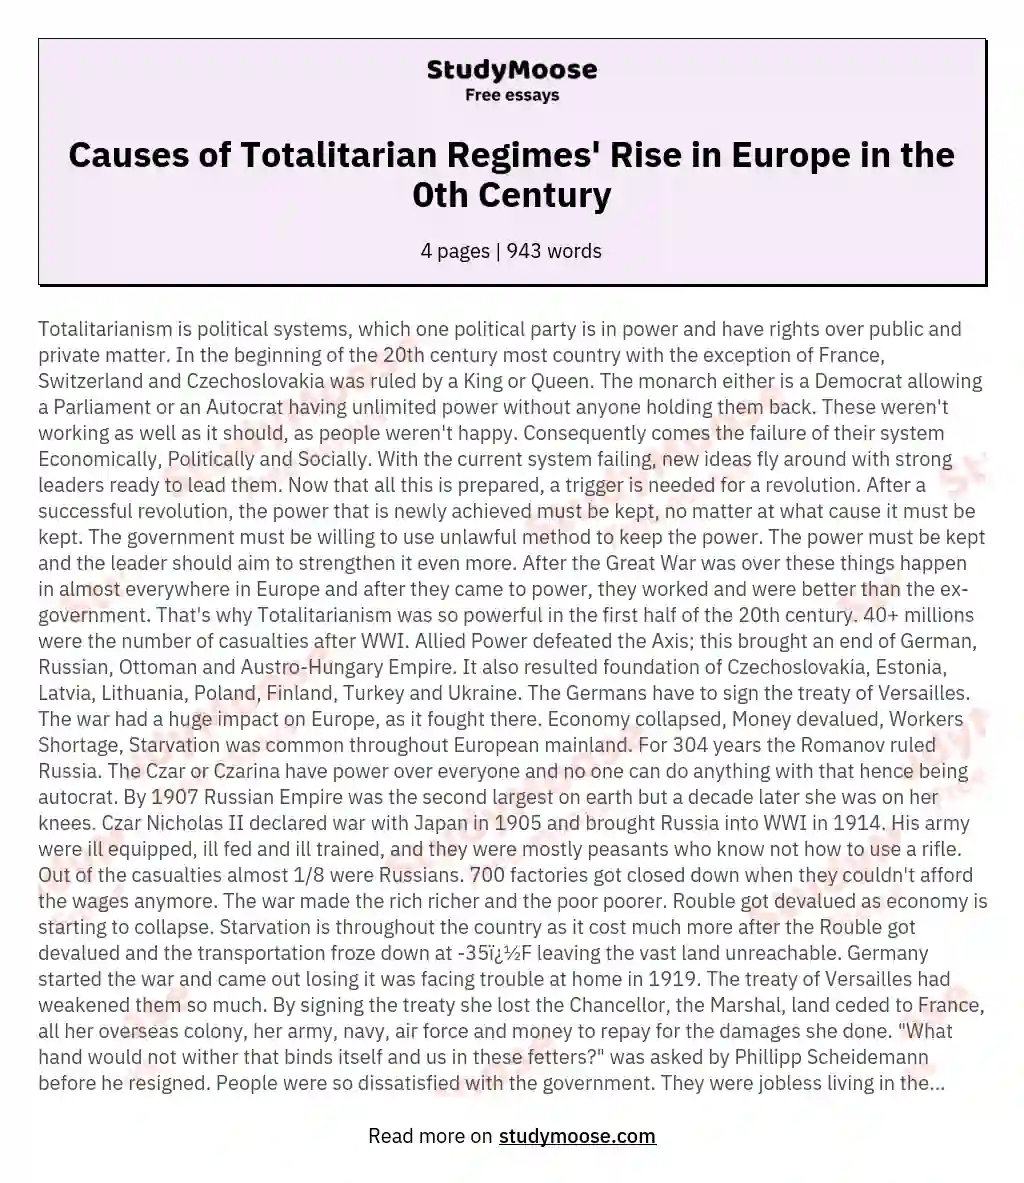 Why did Totalitarian Regimes achieve power in Europe in the first half of the 20th century?